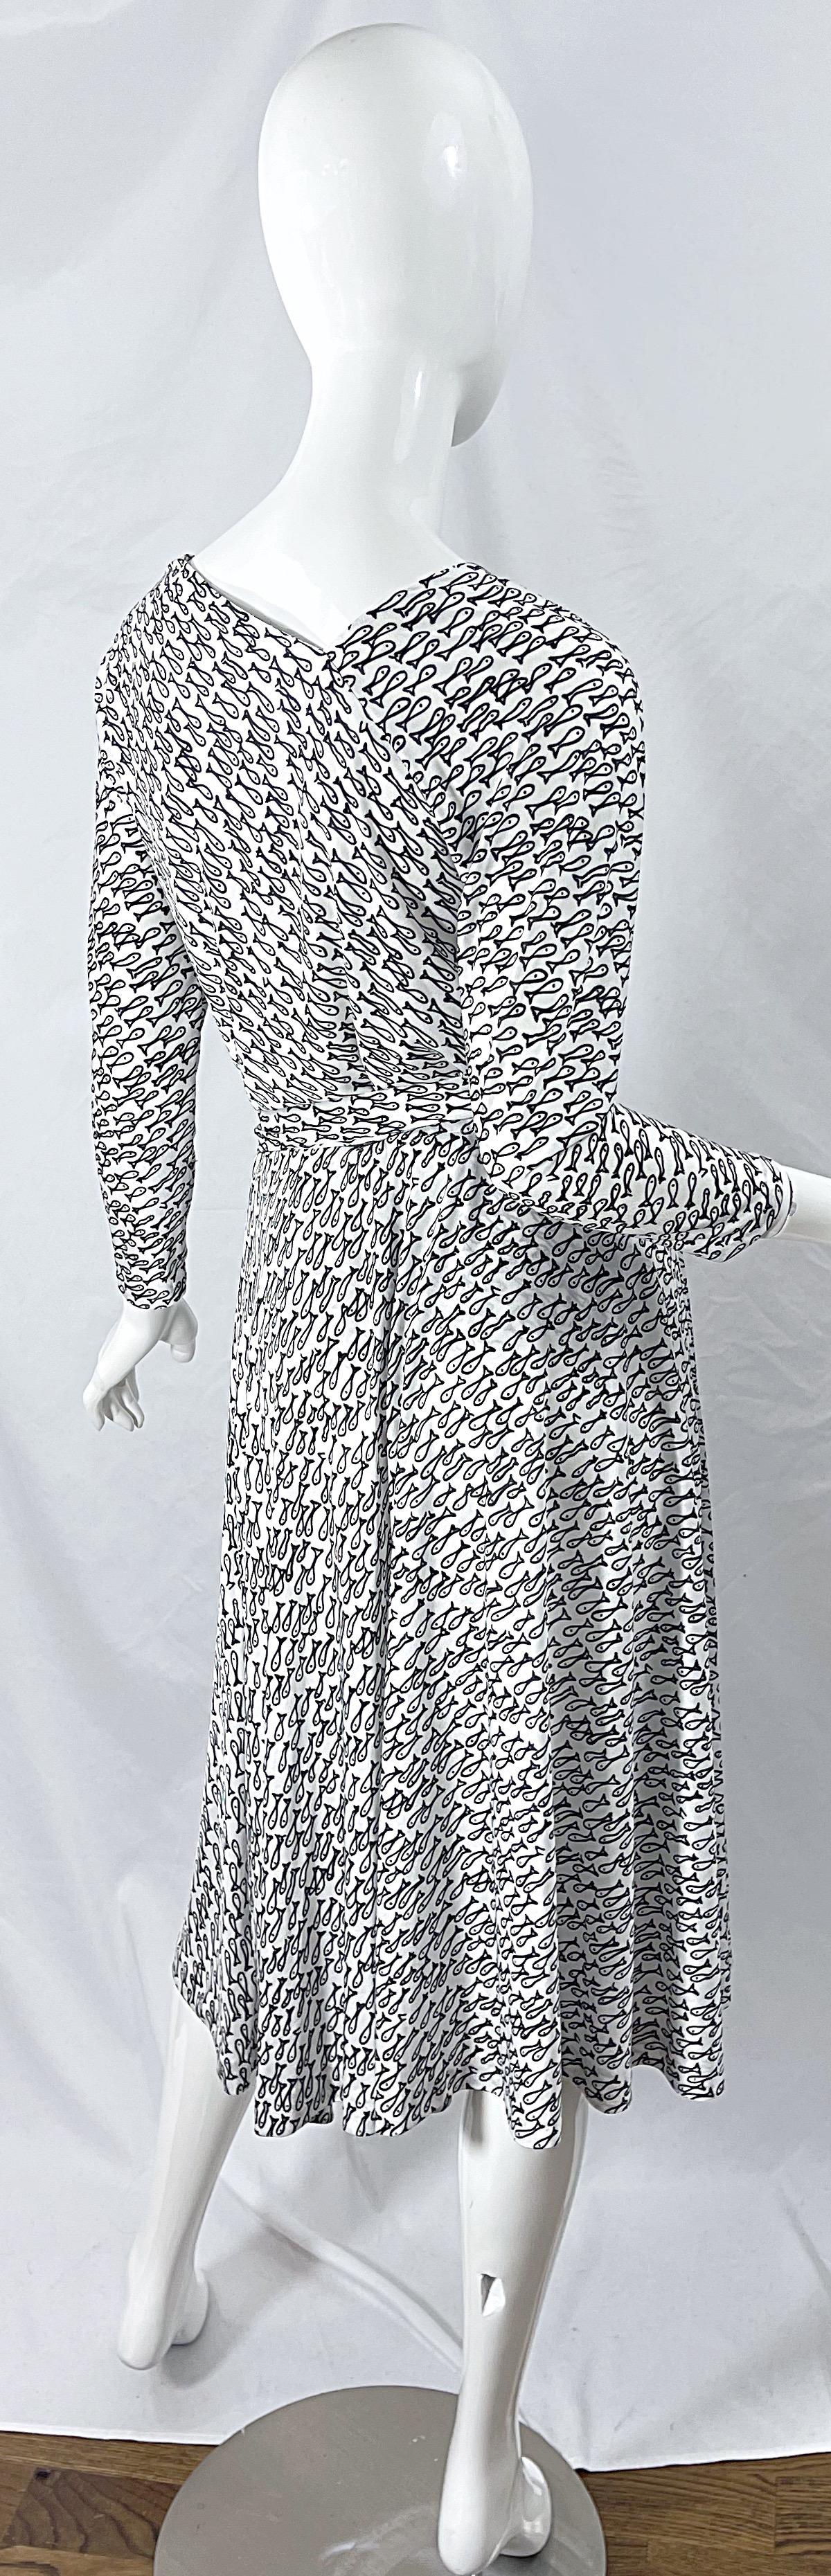 Halston IV 1970s Rare Novelty Fish Print Black and White Vintage 70s Ensemble In Excellent Condition For Sale In San Diego, CA